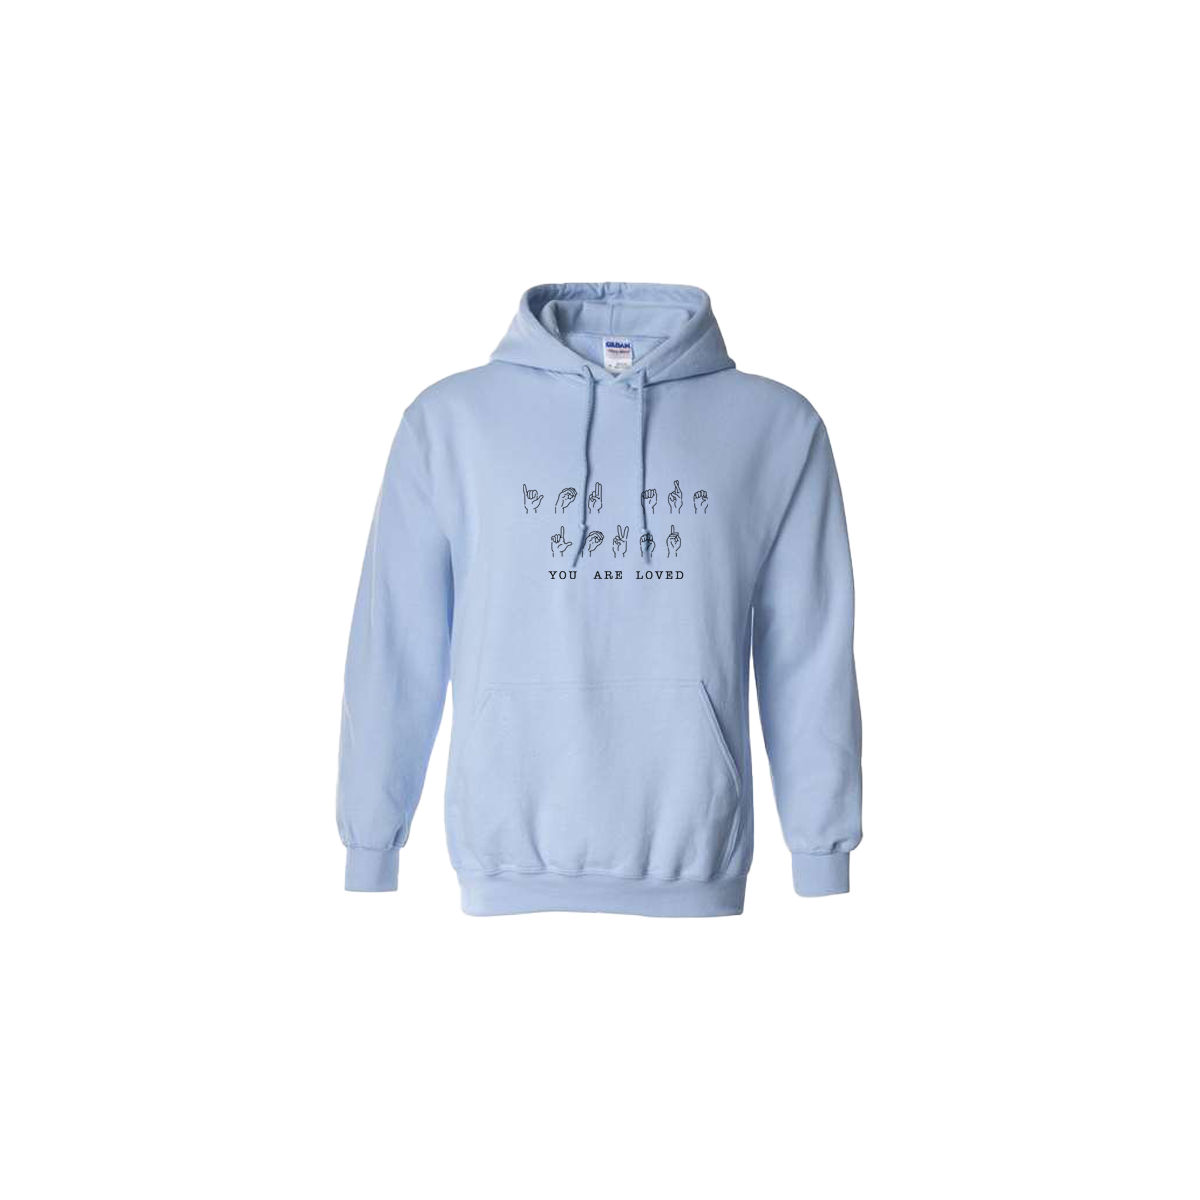 You Are Loved Sign Language Embroidered Light Blue Hoodie - Mental Health Awareness Clothing